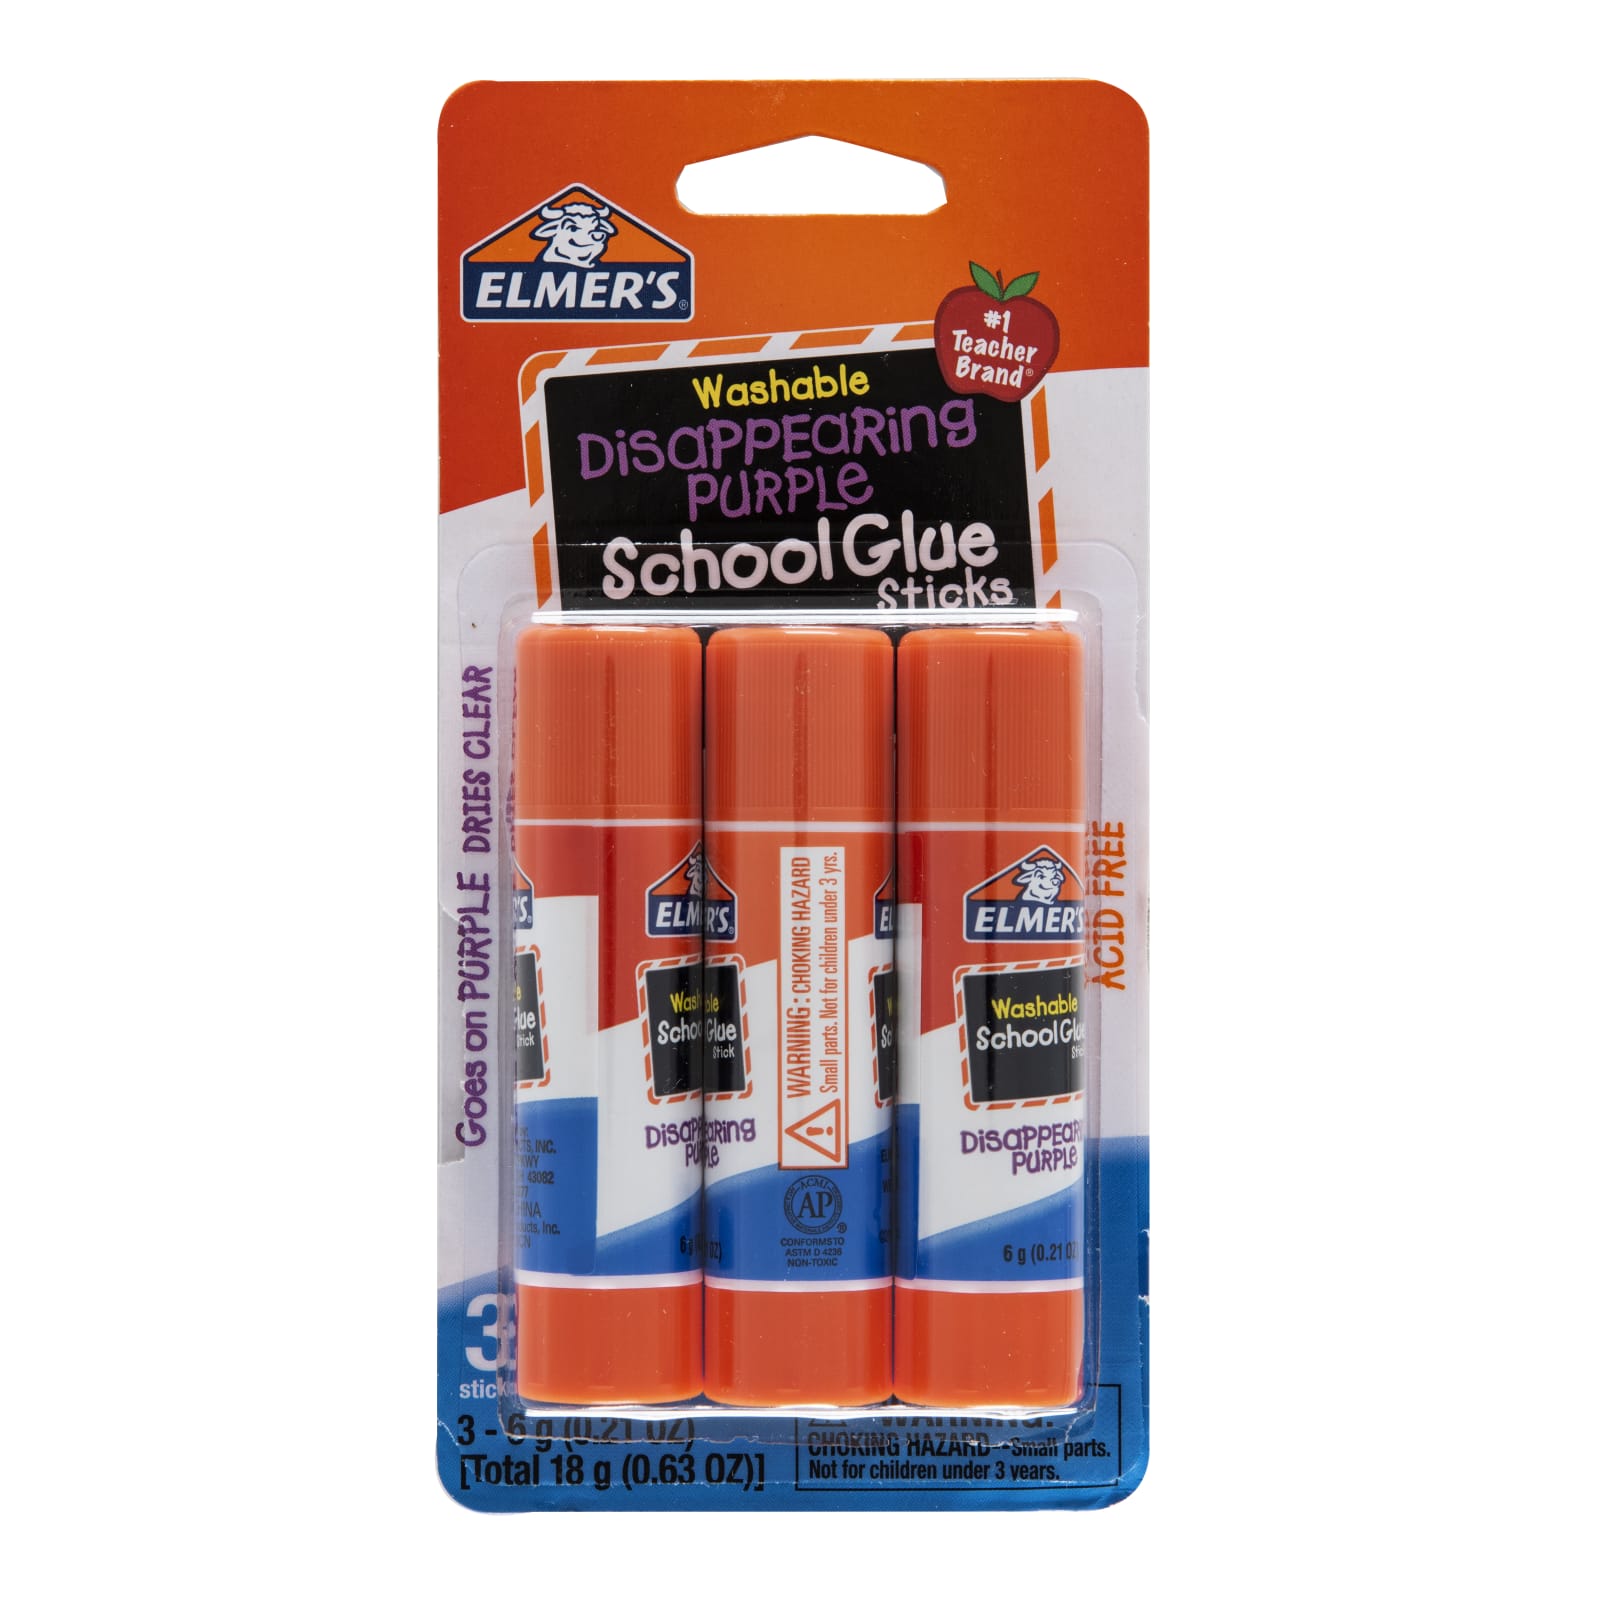 Elmer's -Giant Glue Stick - Washable Disappearing Purple - (3 Pack) 2.31 oz